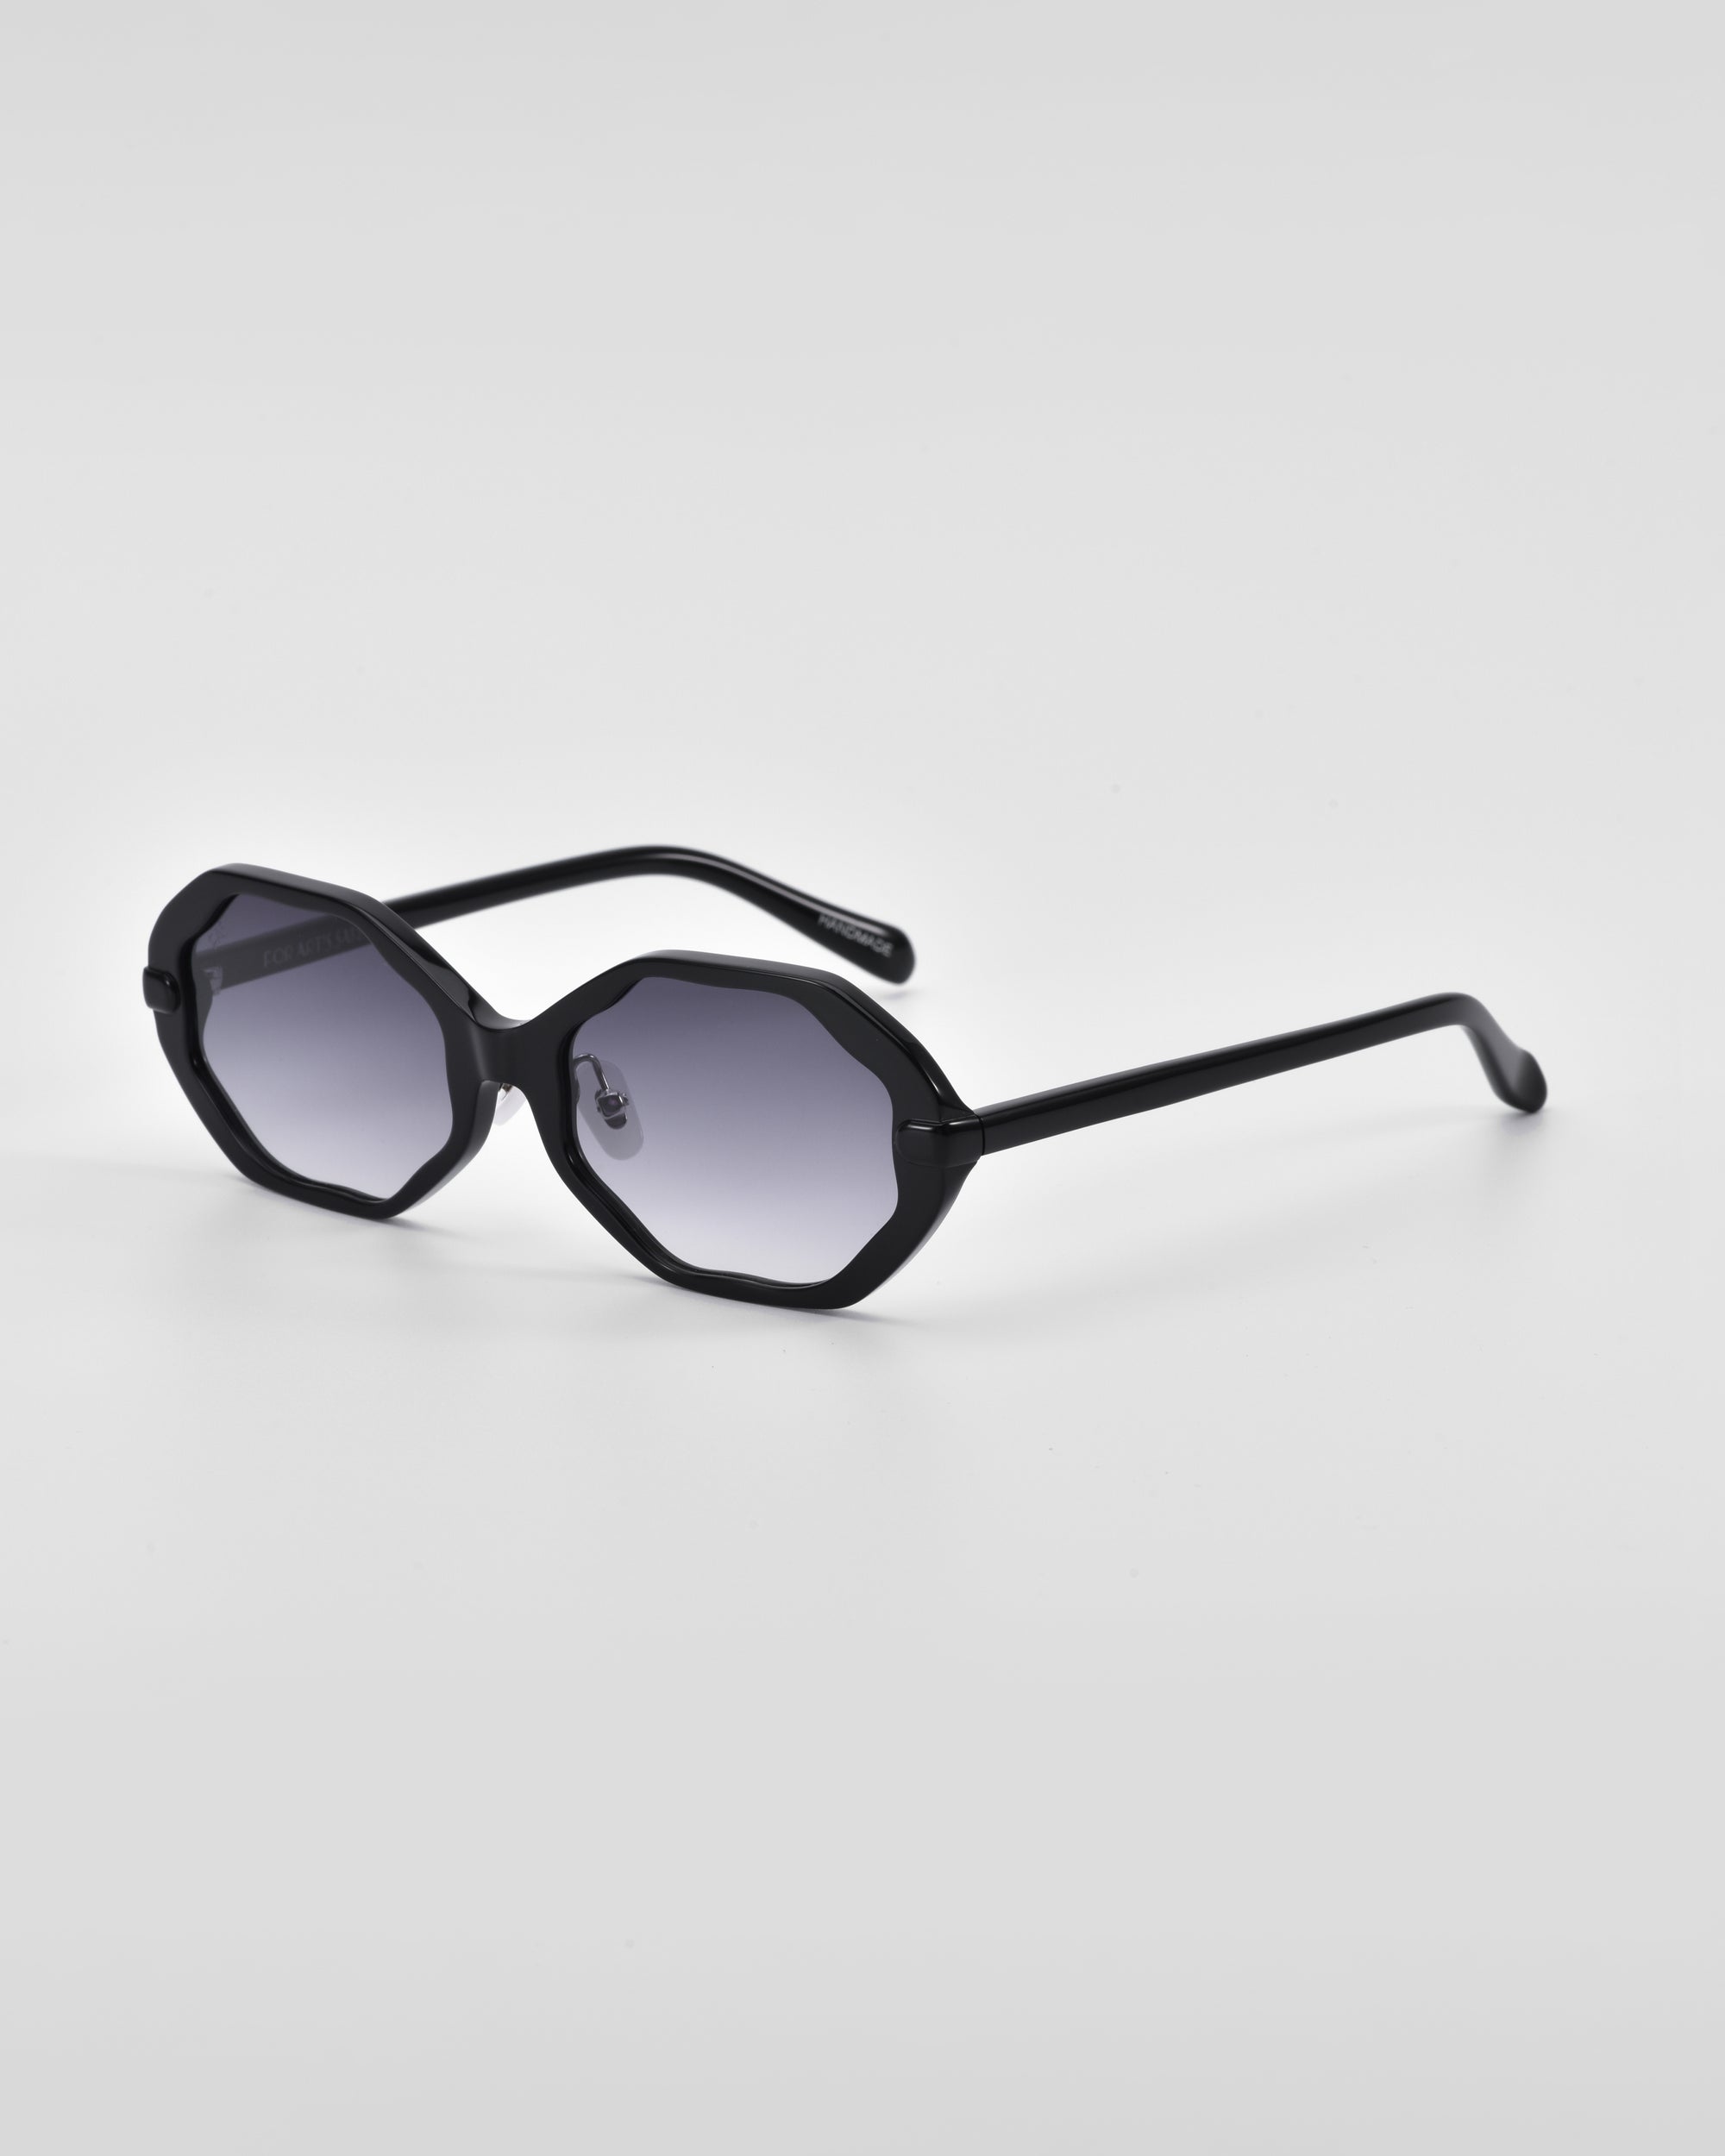 A pair of black octagonal sunglasses with dark tinted lenses is displayed against a plain white background. The For Art's Sake® Lotus sunglasses feature a modern geometric design, sleek temples, and jade-stone nose pads for added elegance.